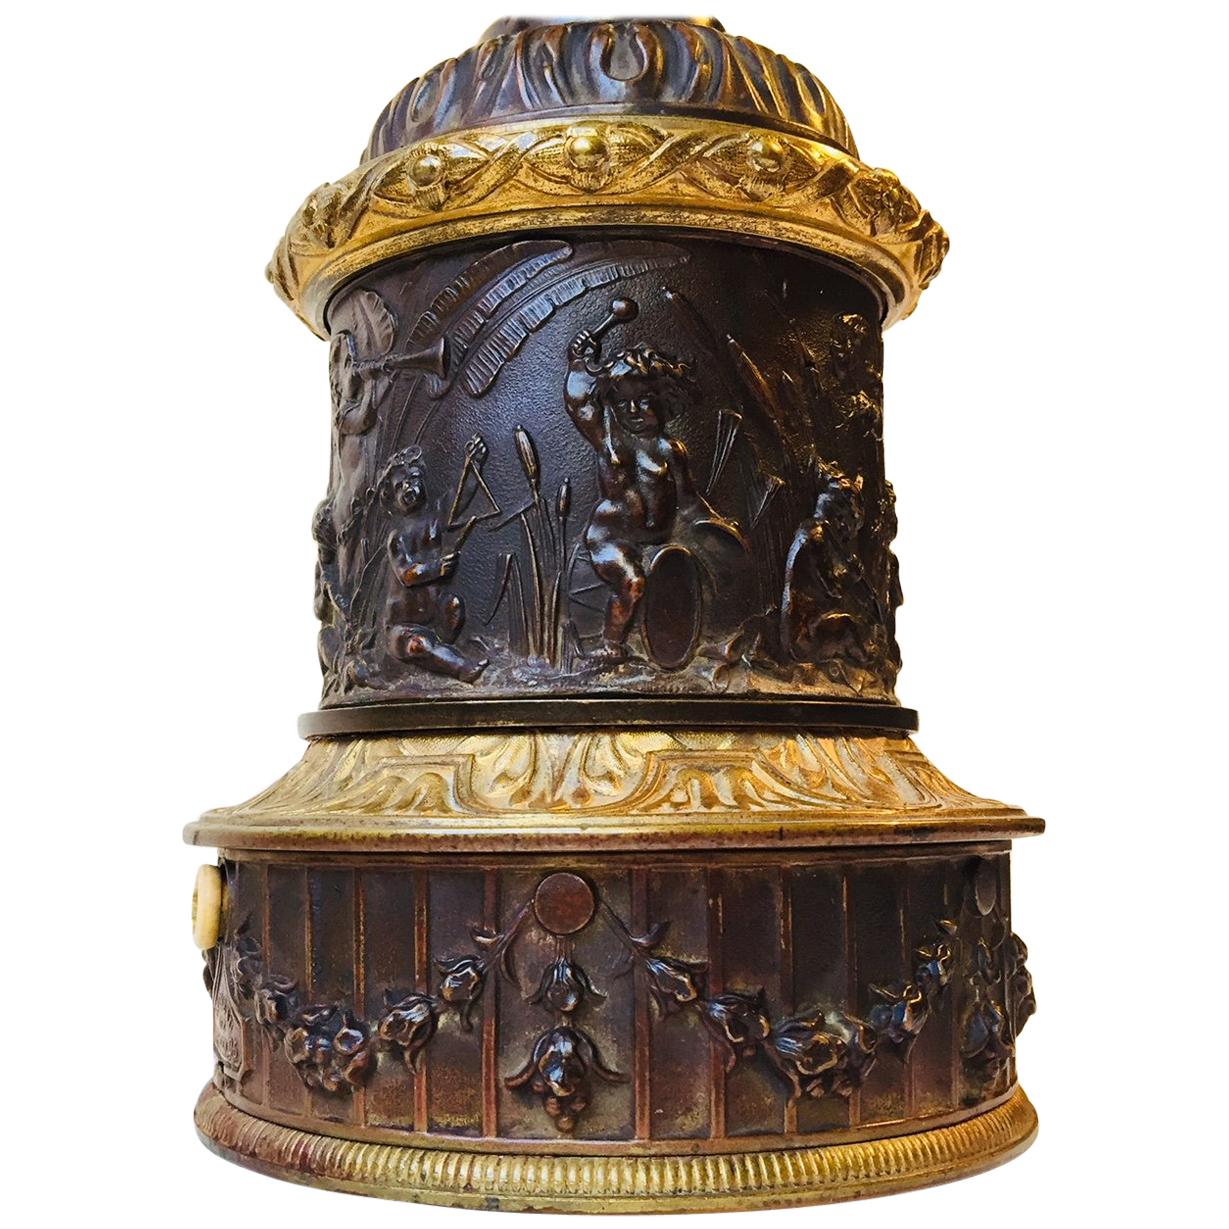 Gagneau of Paris, Antique French Table Lamp in Bronze, 19th Century